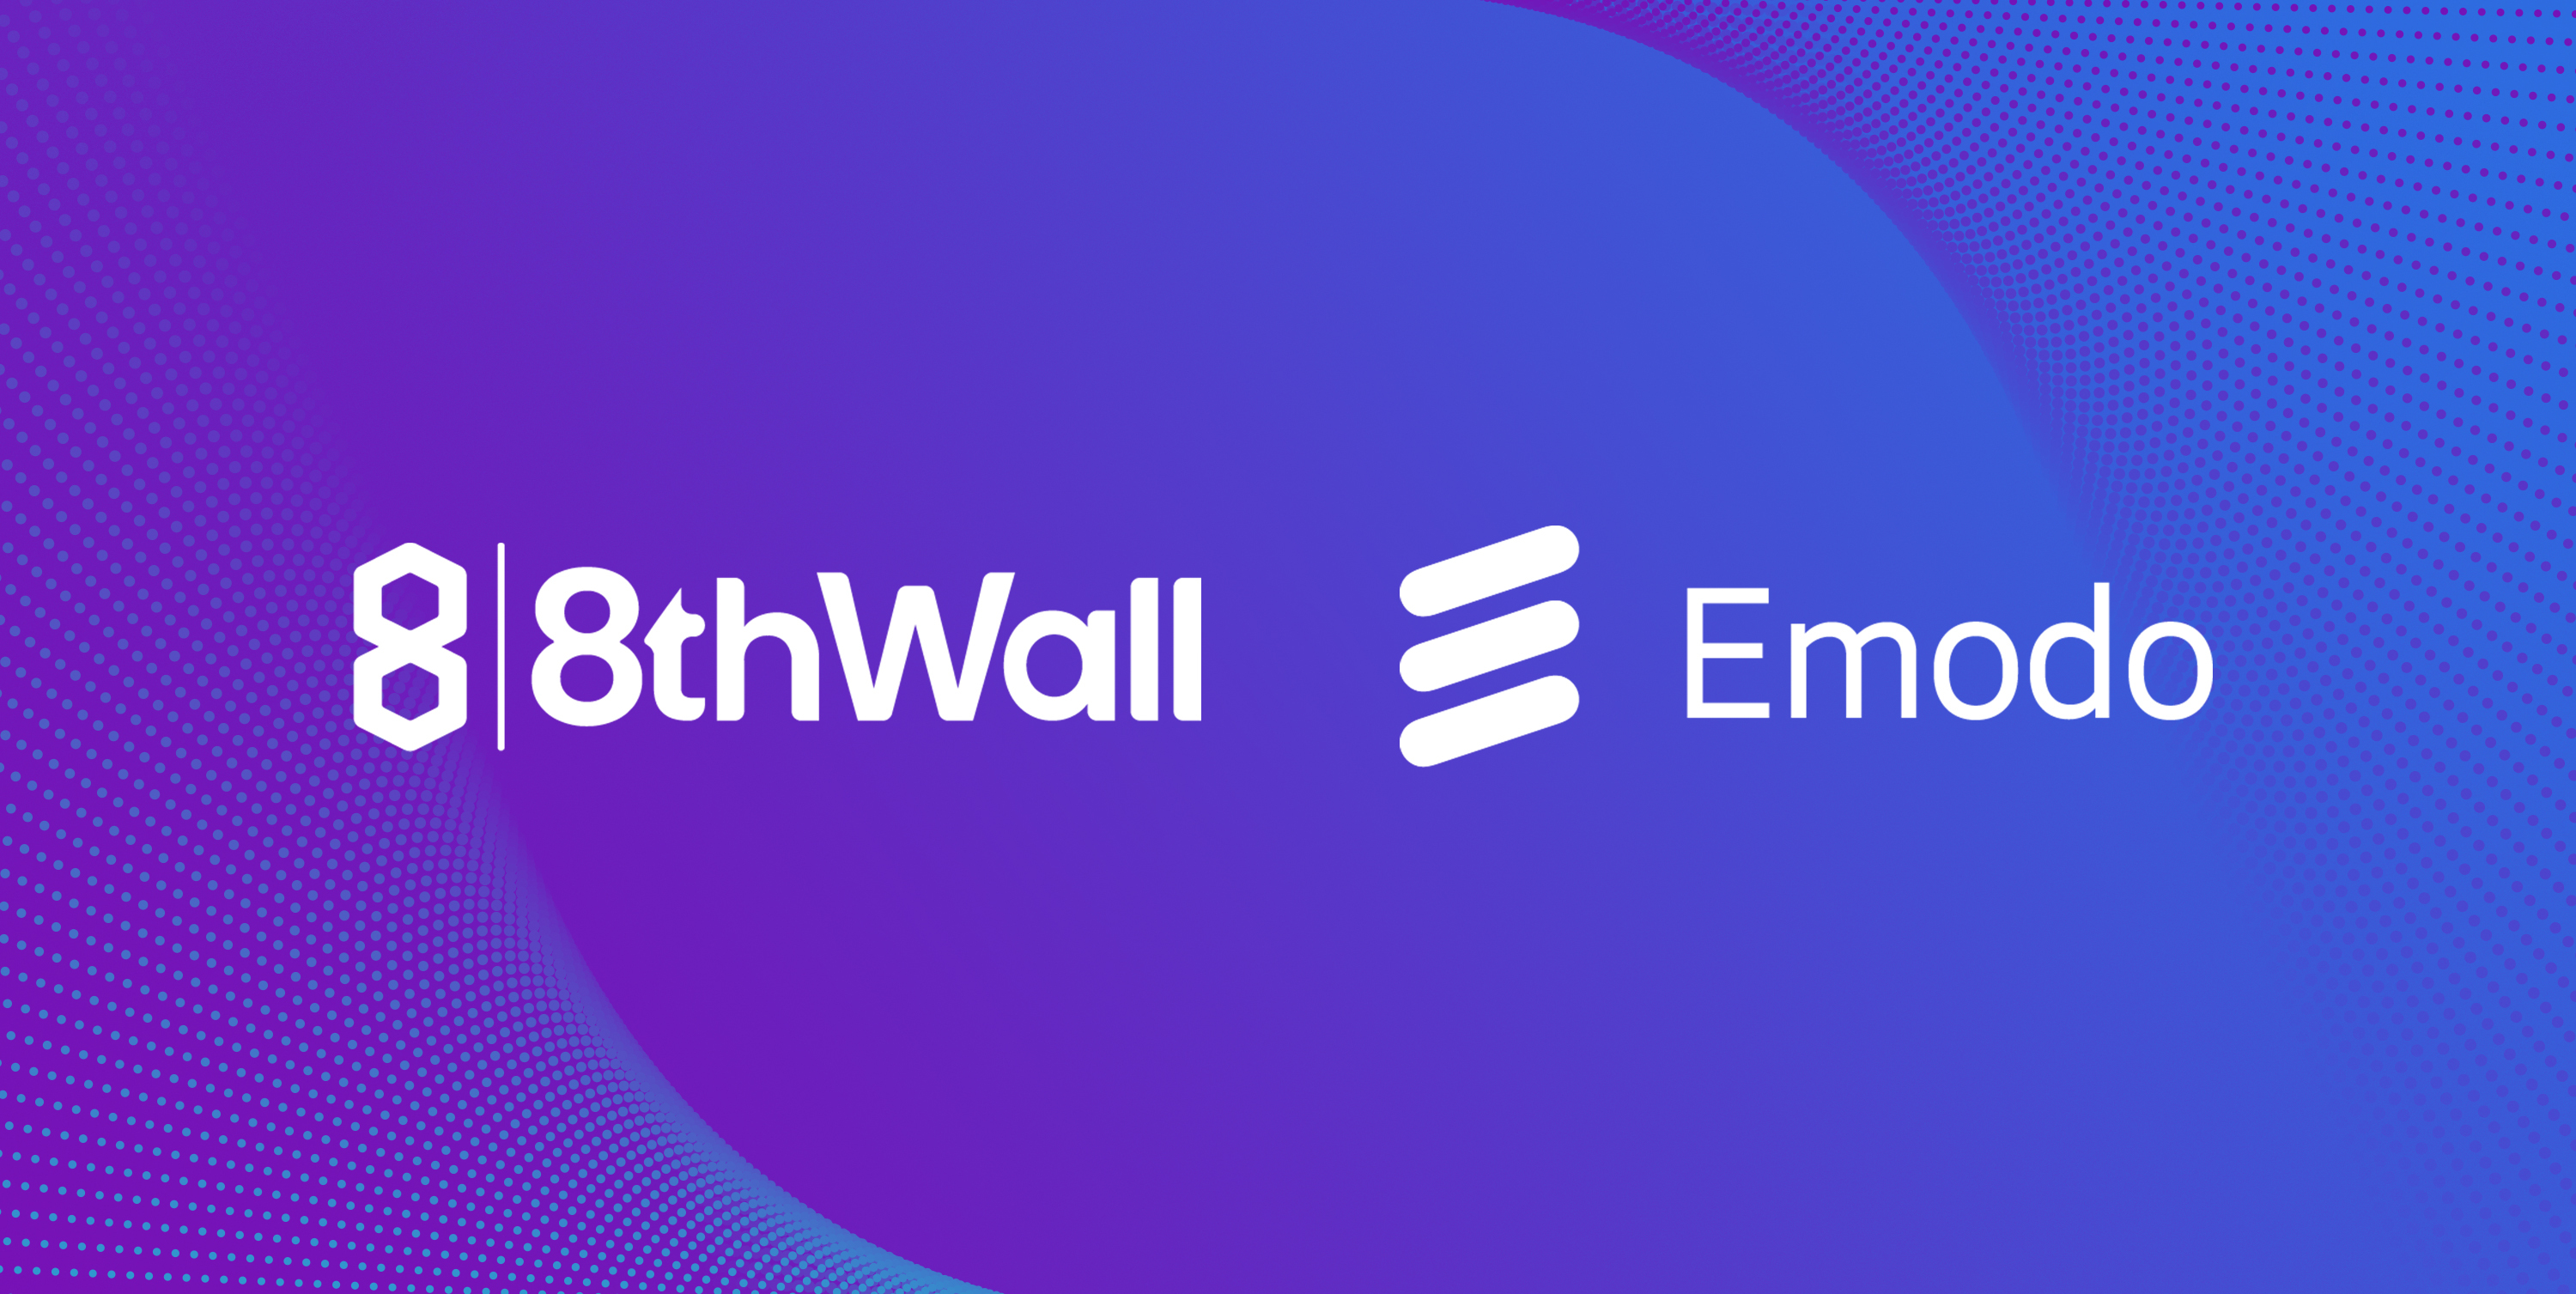 Announcing our partnership with Ericsson Emodo which brings ad distribution to 8th Wall